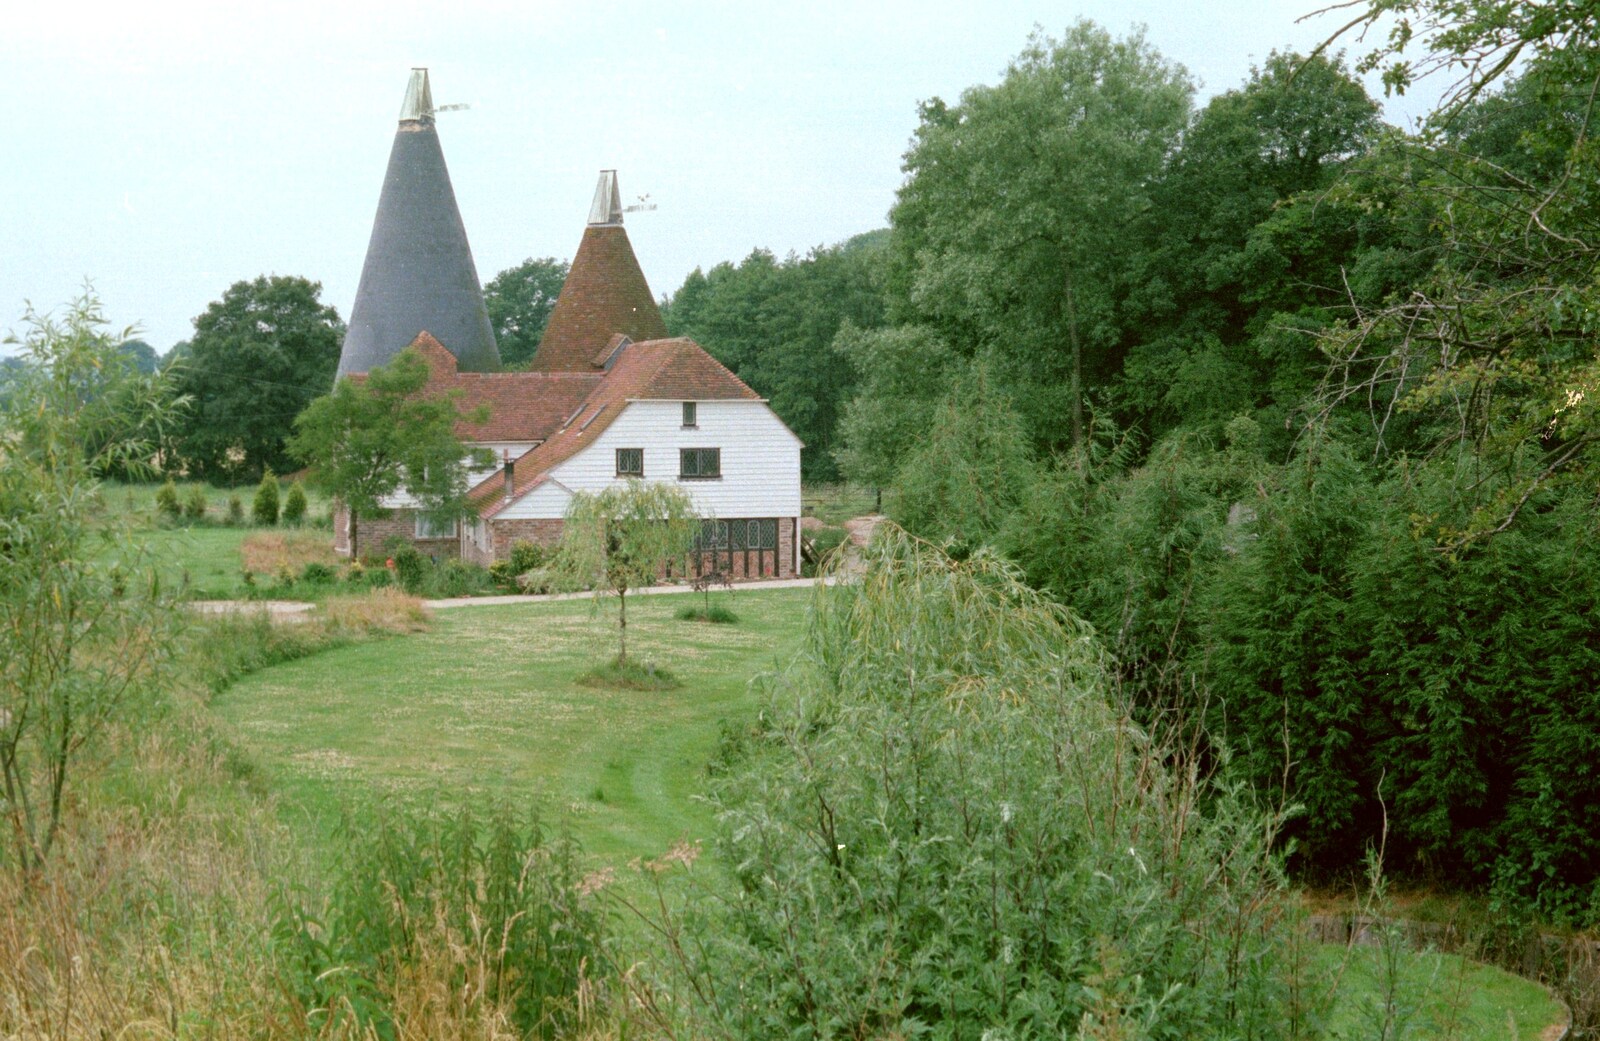 A pastoral oast-house scene from A Trip to Groombridge, Kent - 10th July 1986